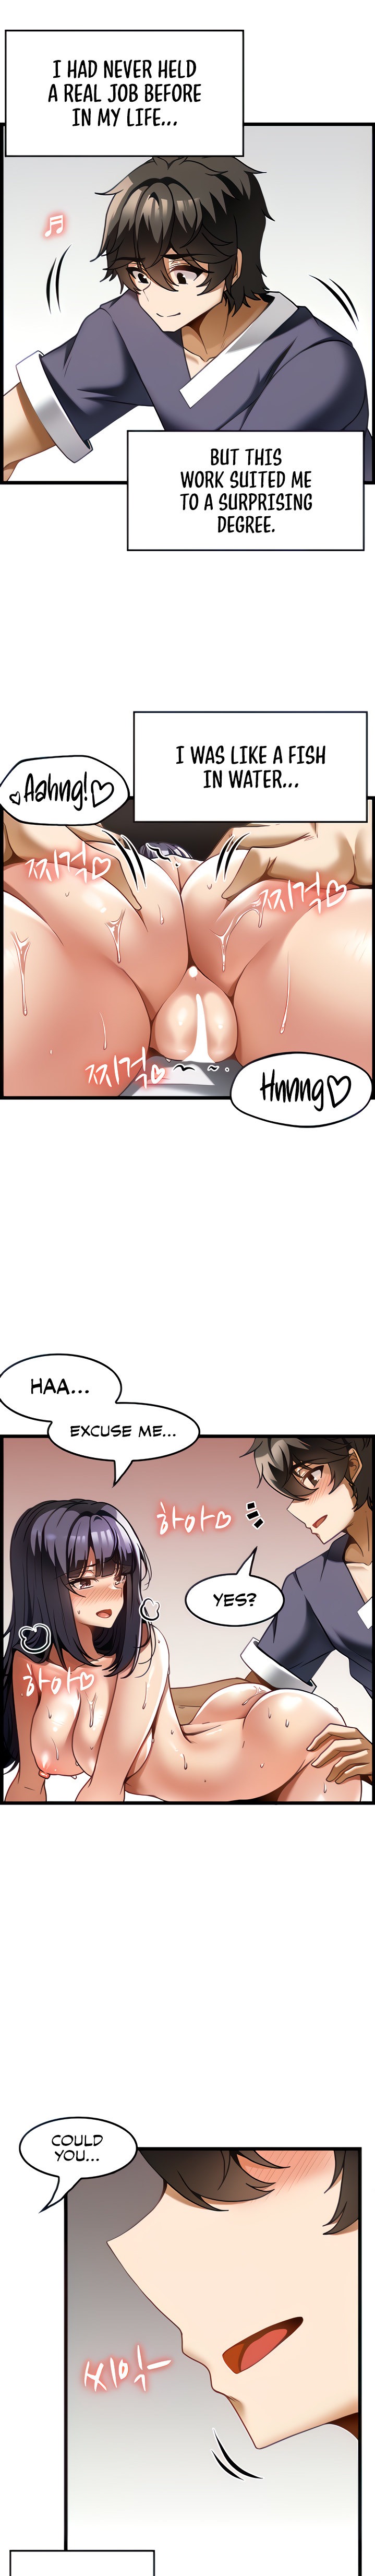 Too Good At Massages - Chapter 21 Page 4